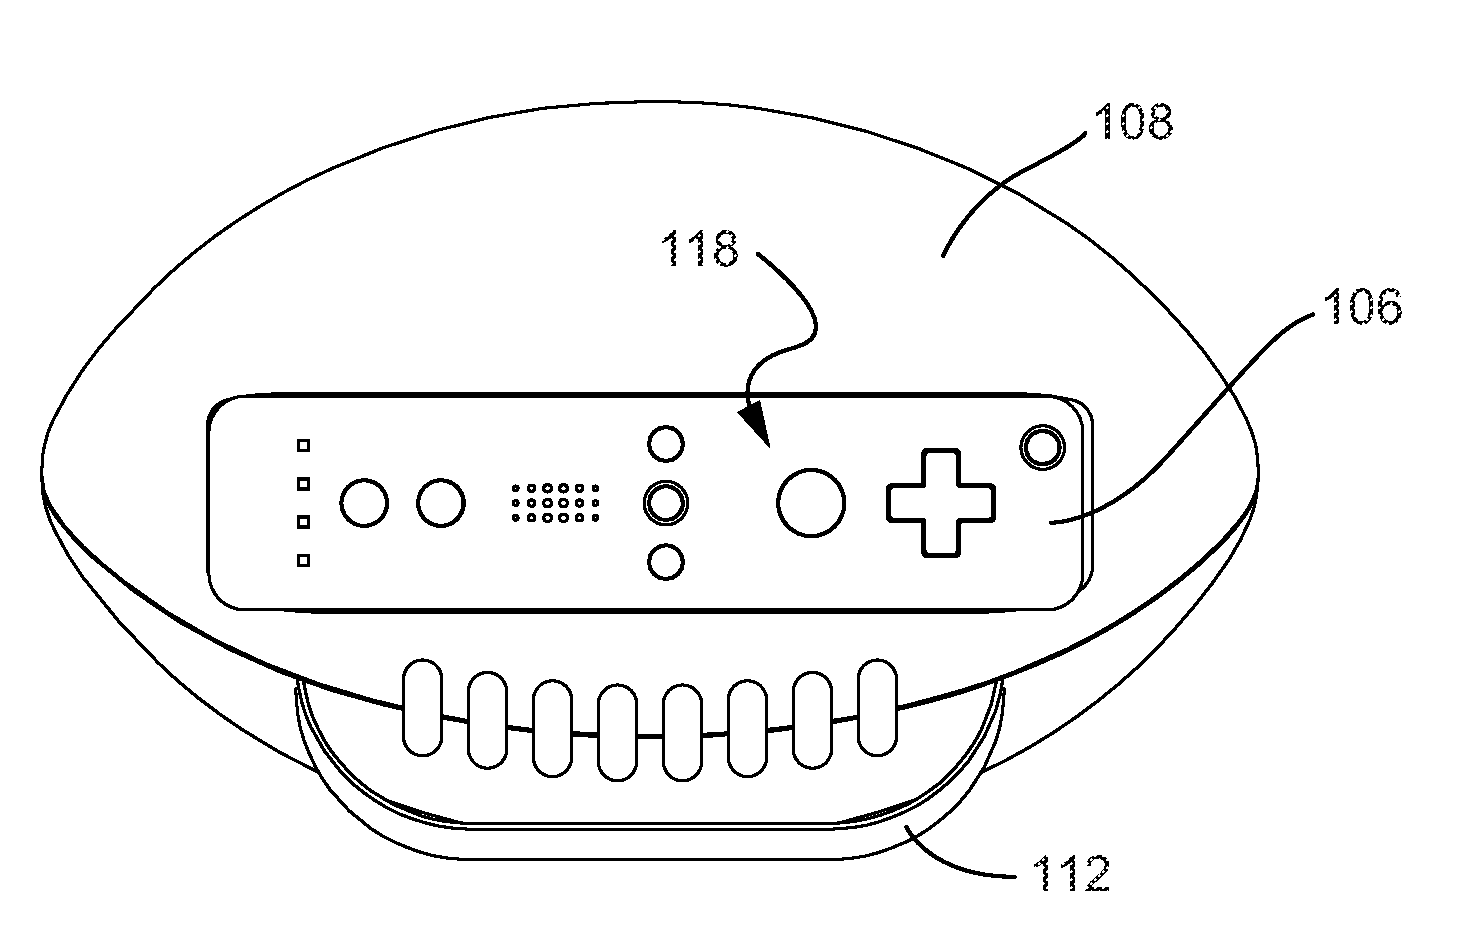 Method and apparatus for simulating games involving a ball